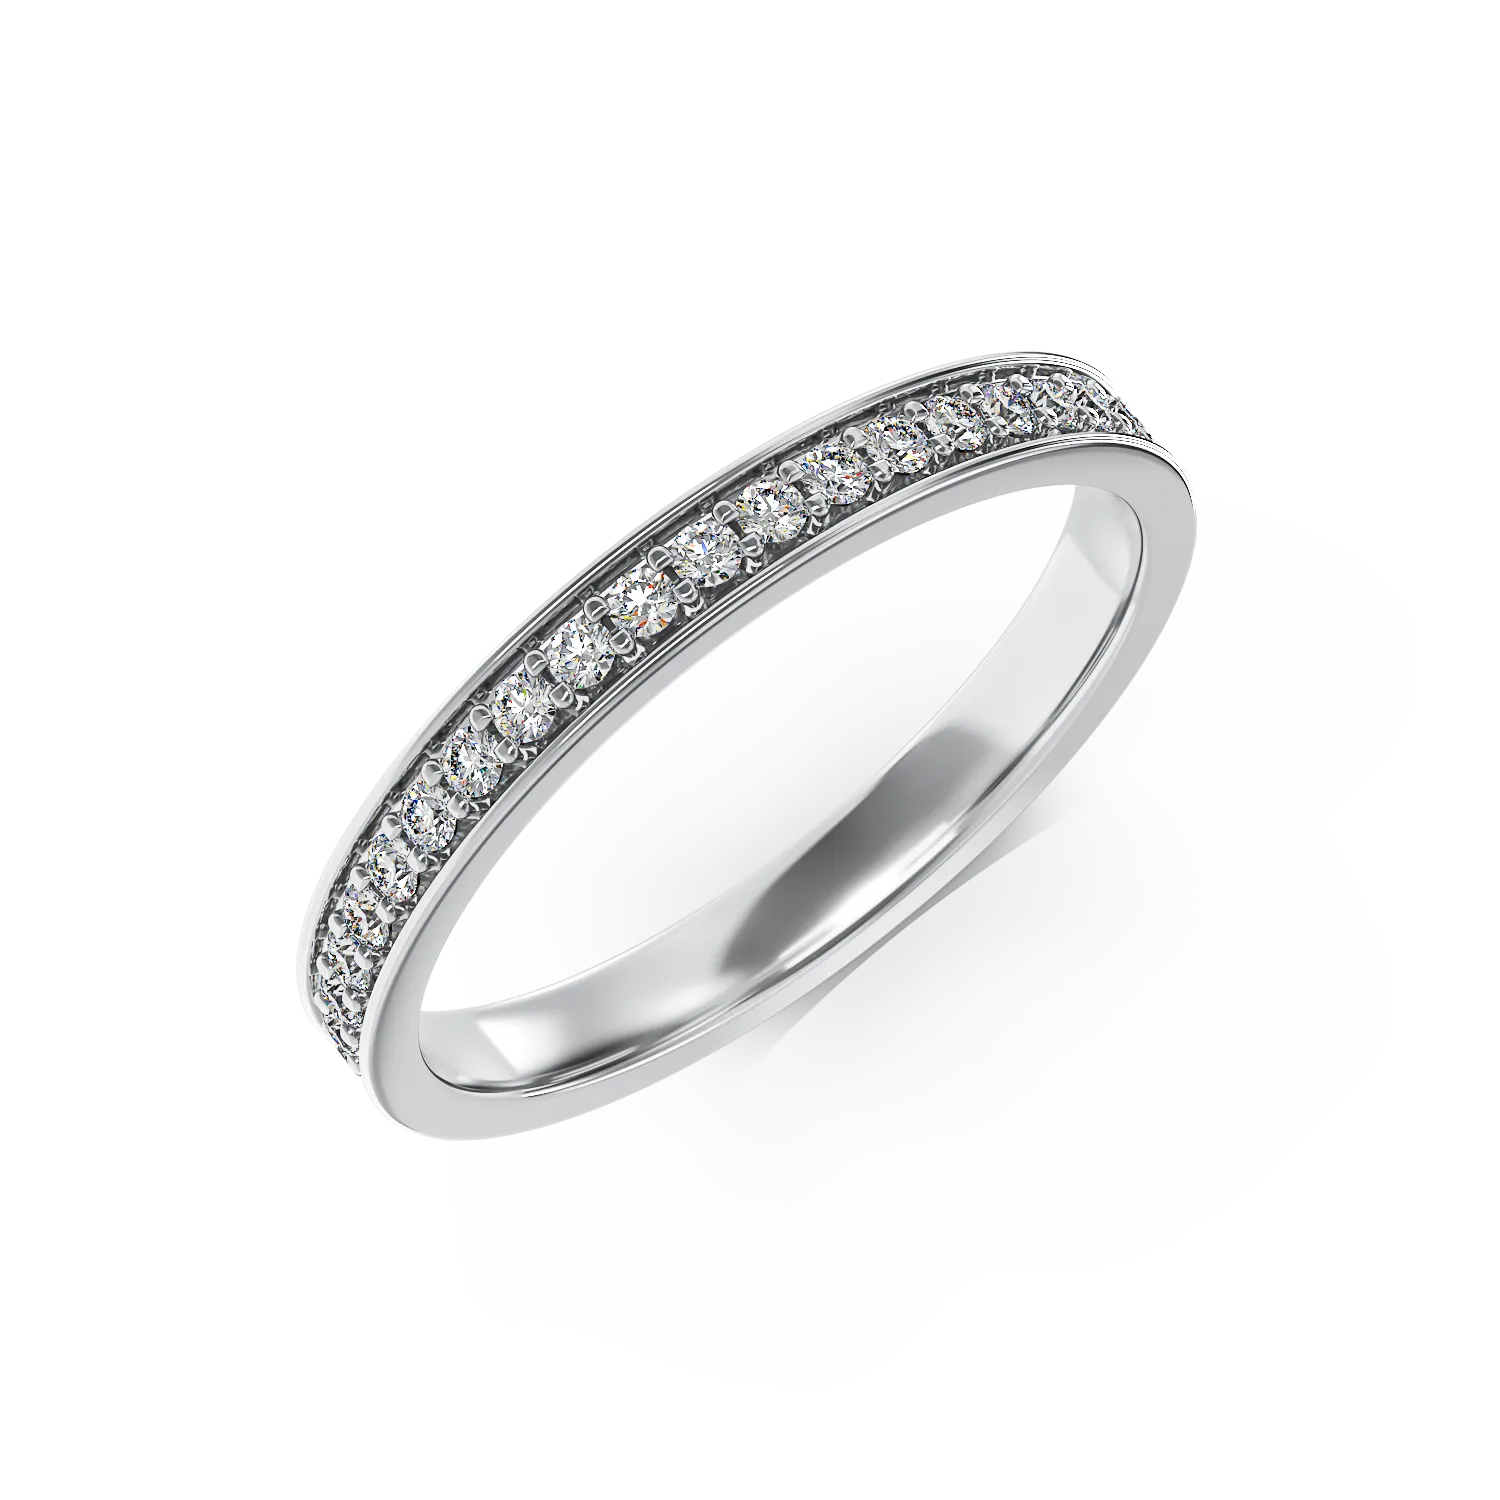 Eternity ring in white gold with 0.3ct diamonds